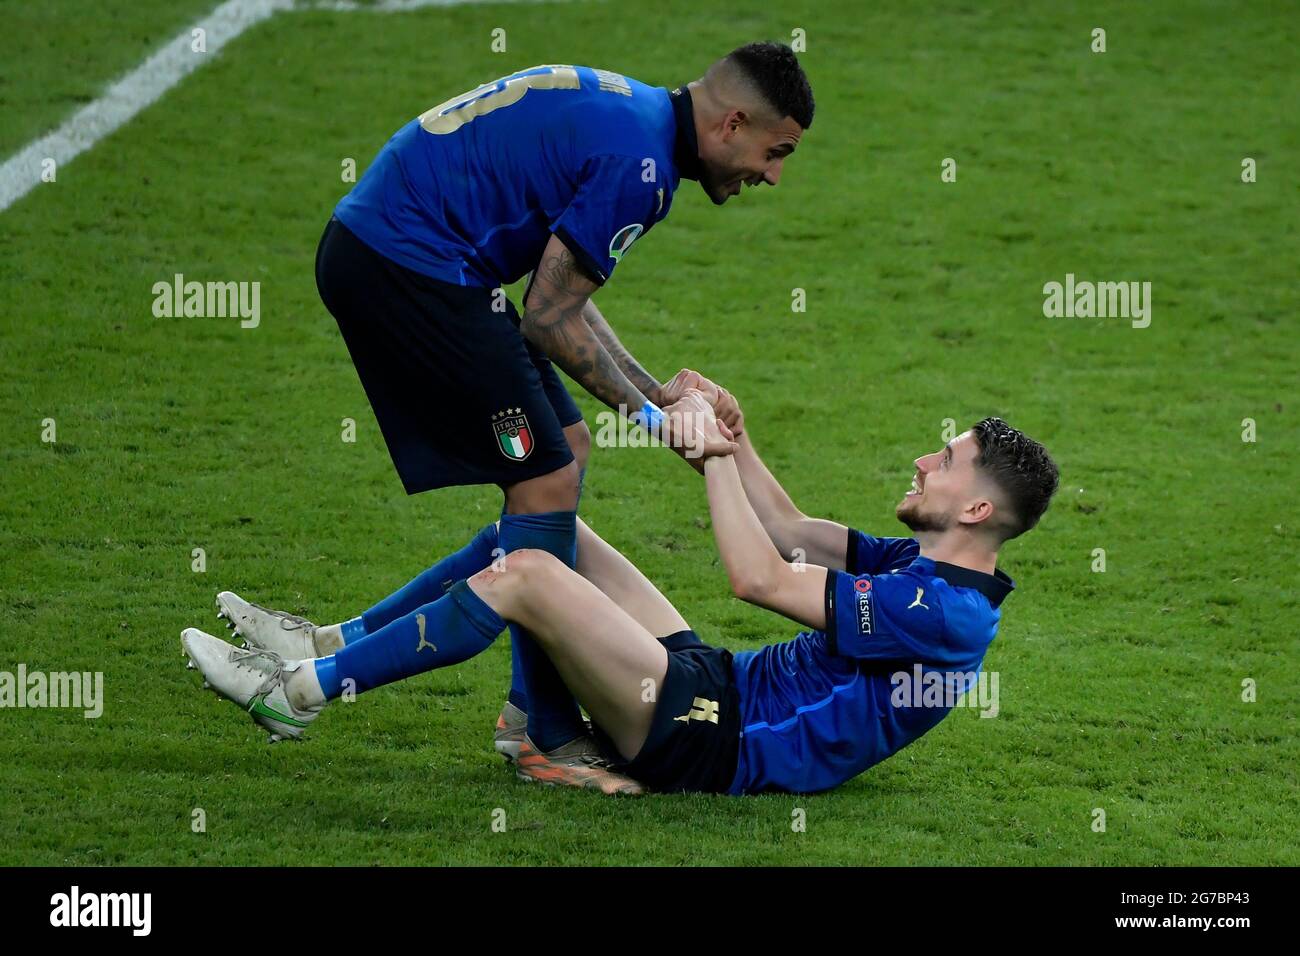 London, UK. 11th July, 2021. Emerson Palmieri Dos Santos and Jorge Luiz Frello Filho Jorginho of Italy celebrate the victory at the end of the Uefa Euro 2020 Final football match between Italy and England at Wembley stadium in London (England), July 11th, 2021. Photo Andrea Staccioli/Insidefoto Credit: insidefoto srl/Alamy Live News Stock Photo